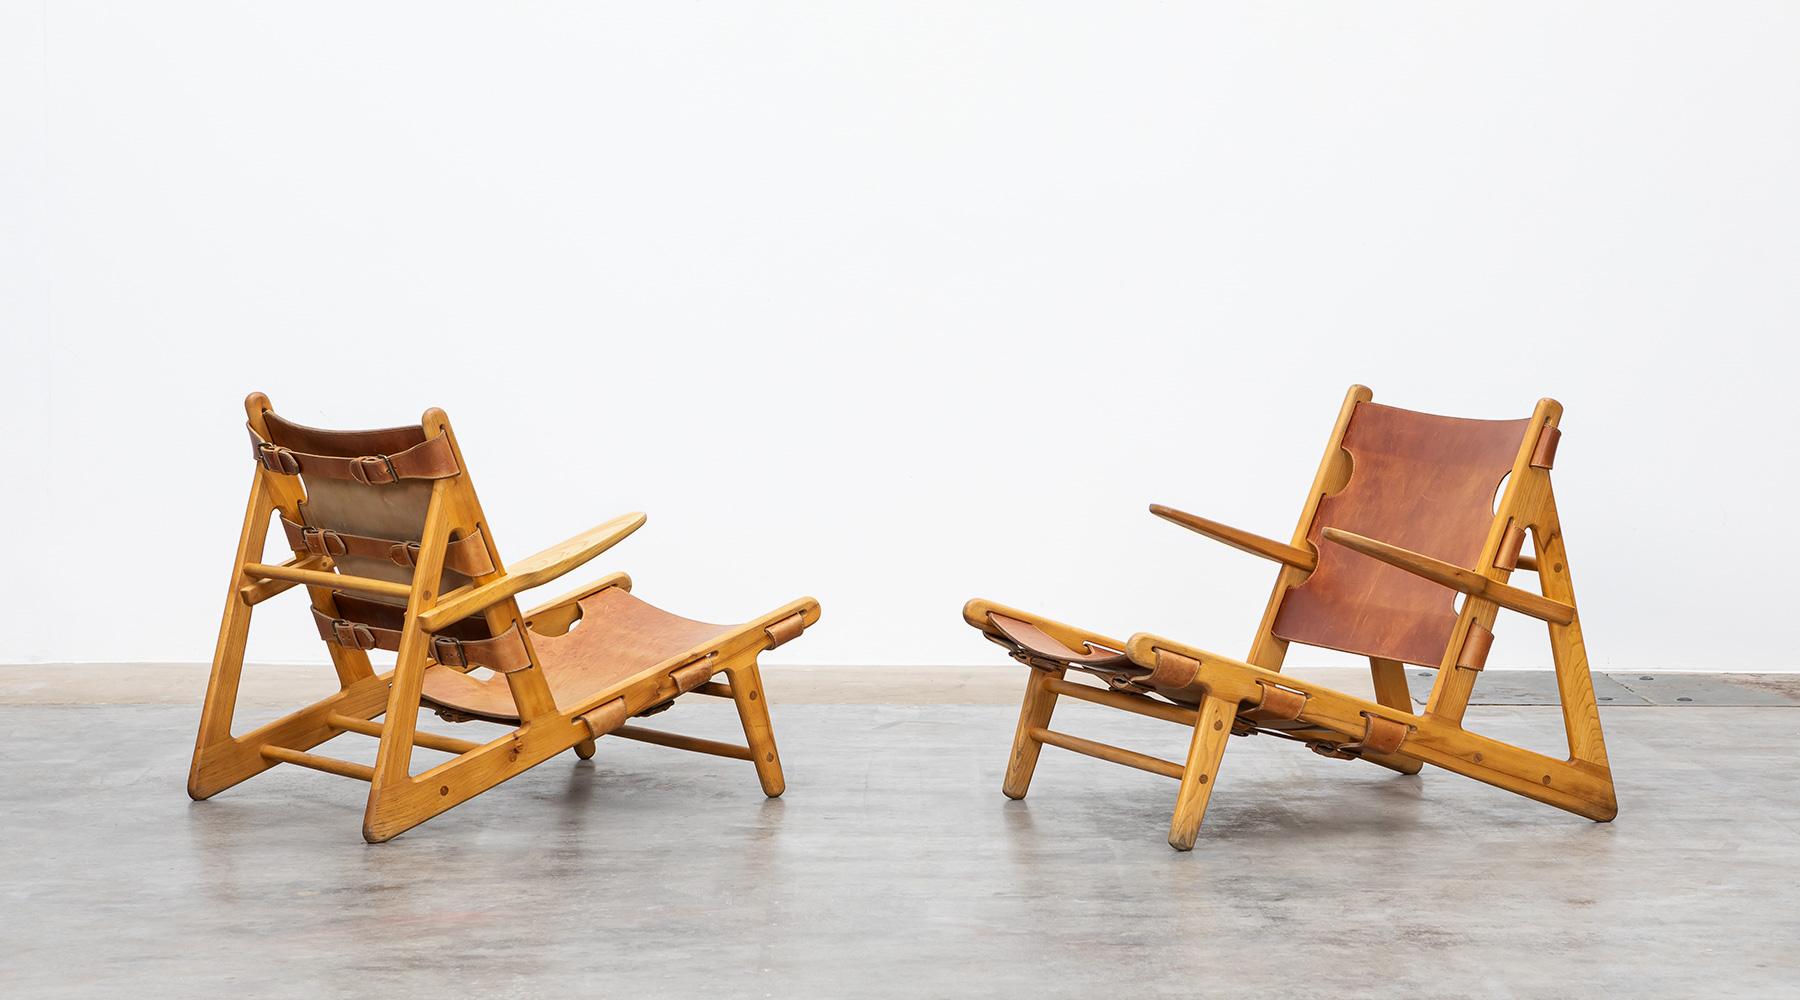 Lounge chairs, 'Hunting Chairs', wood, leather, Borge Mogensen, Denmark, 1950.

This example of the so-called 